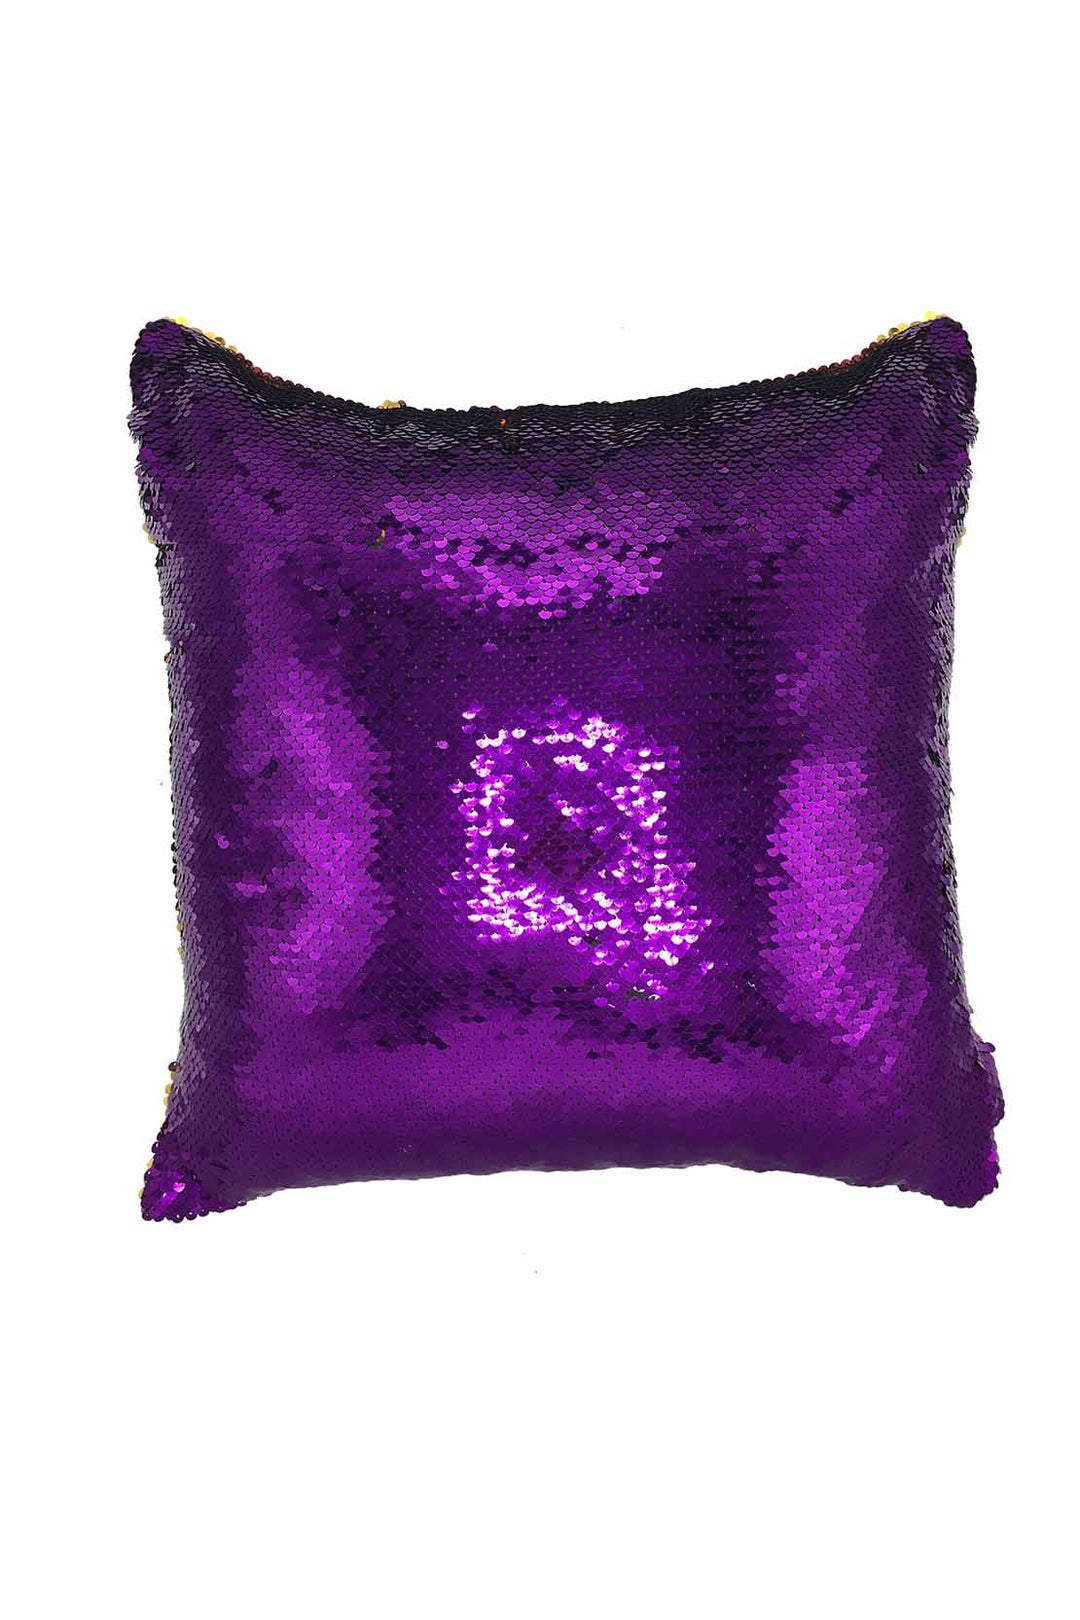 Glitter Cushion Cover Without Filling Purple and Golden - V Surfaces